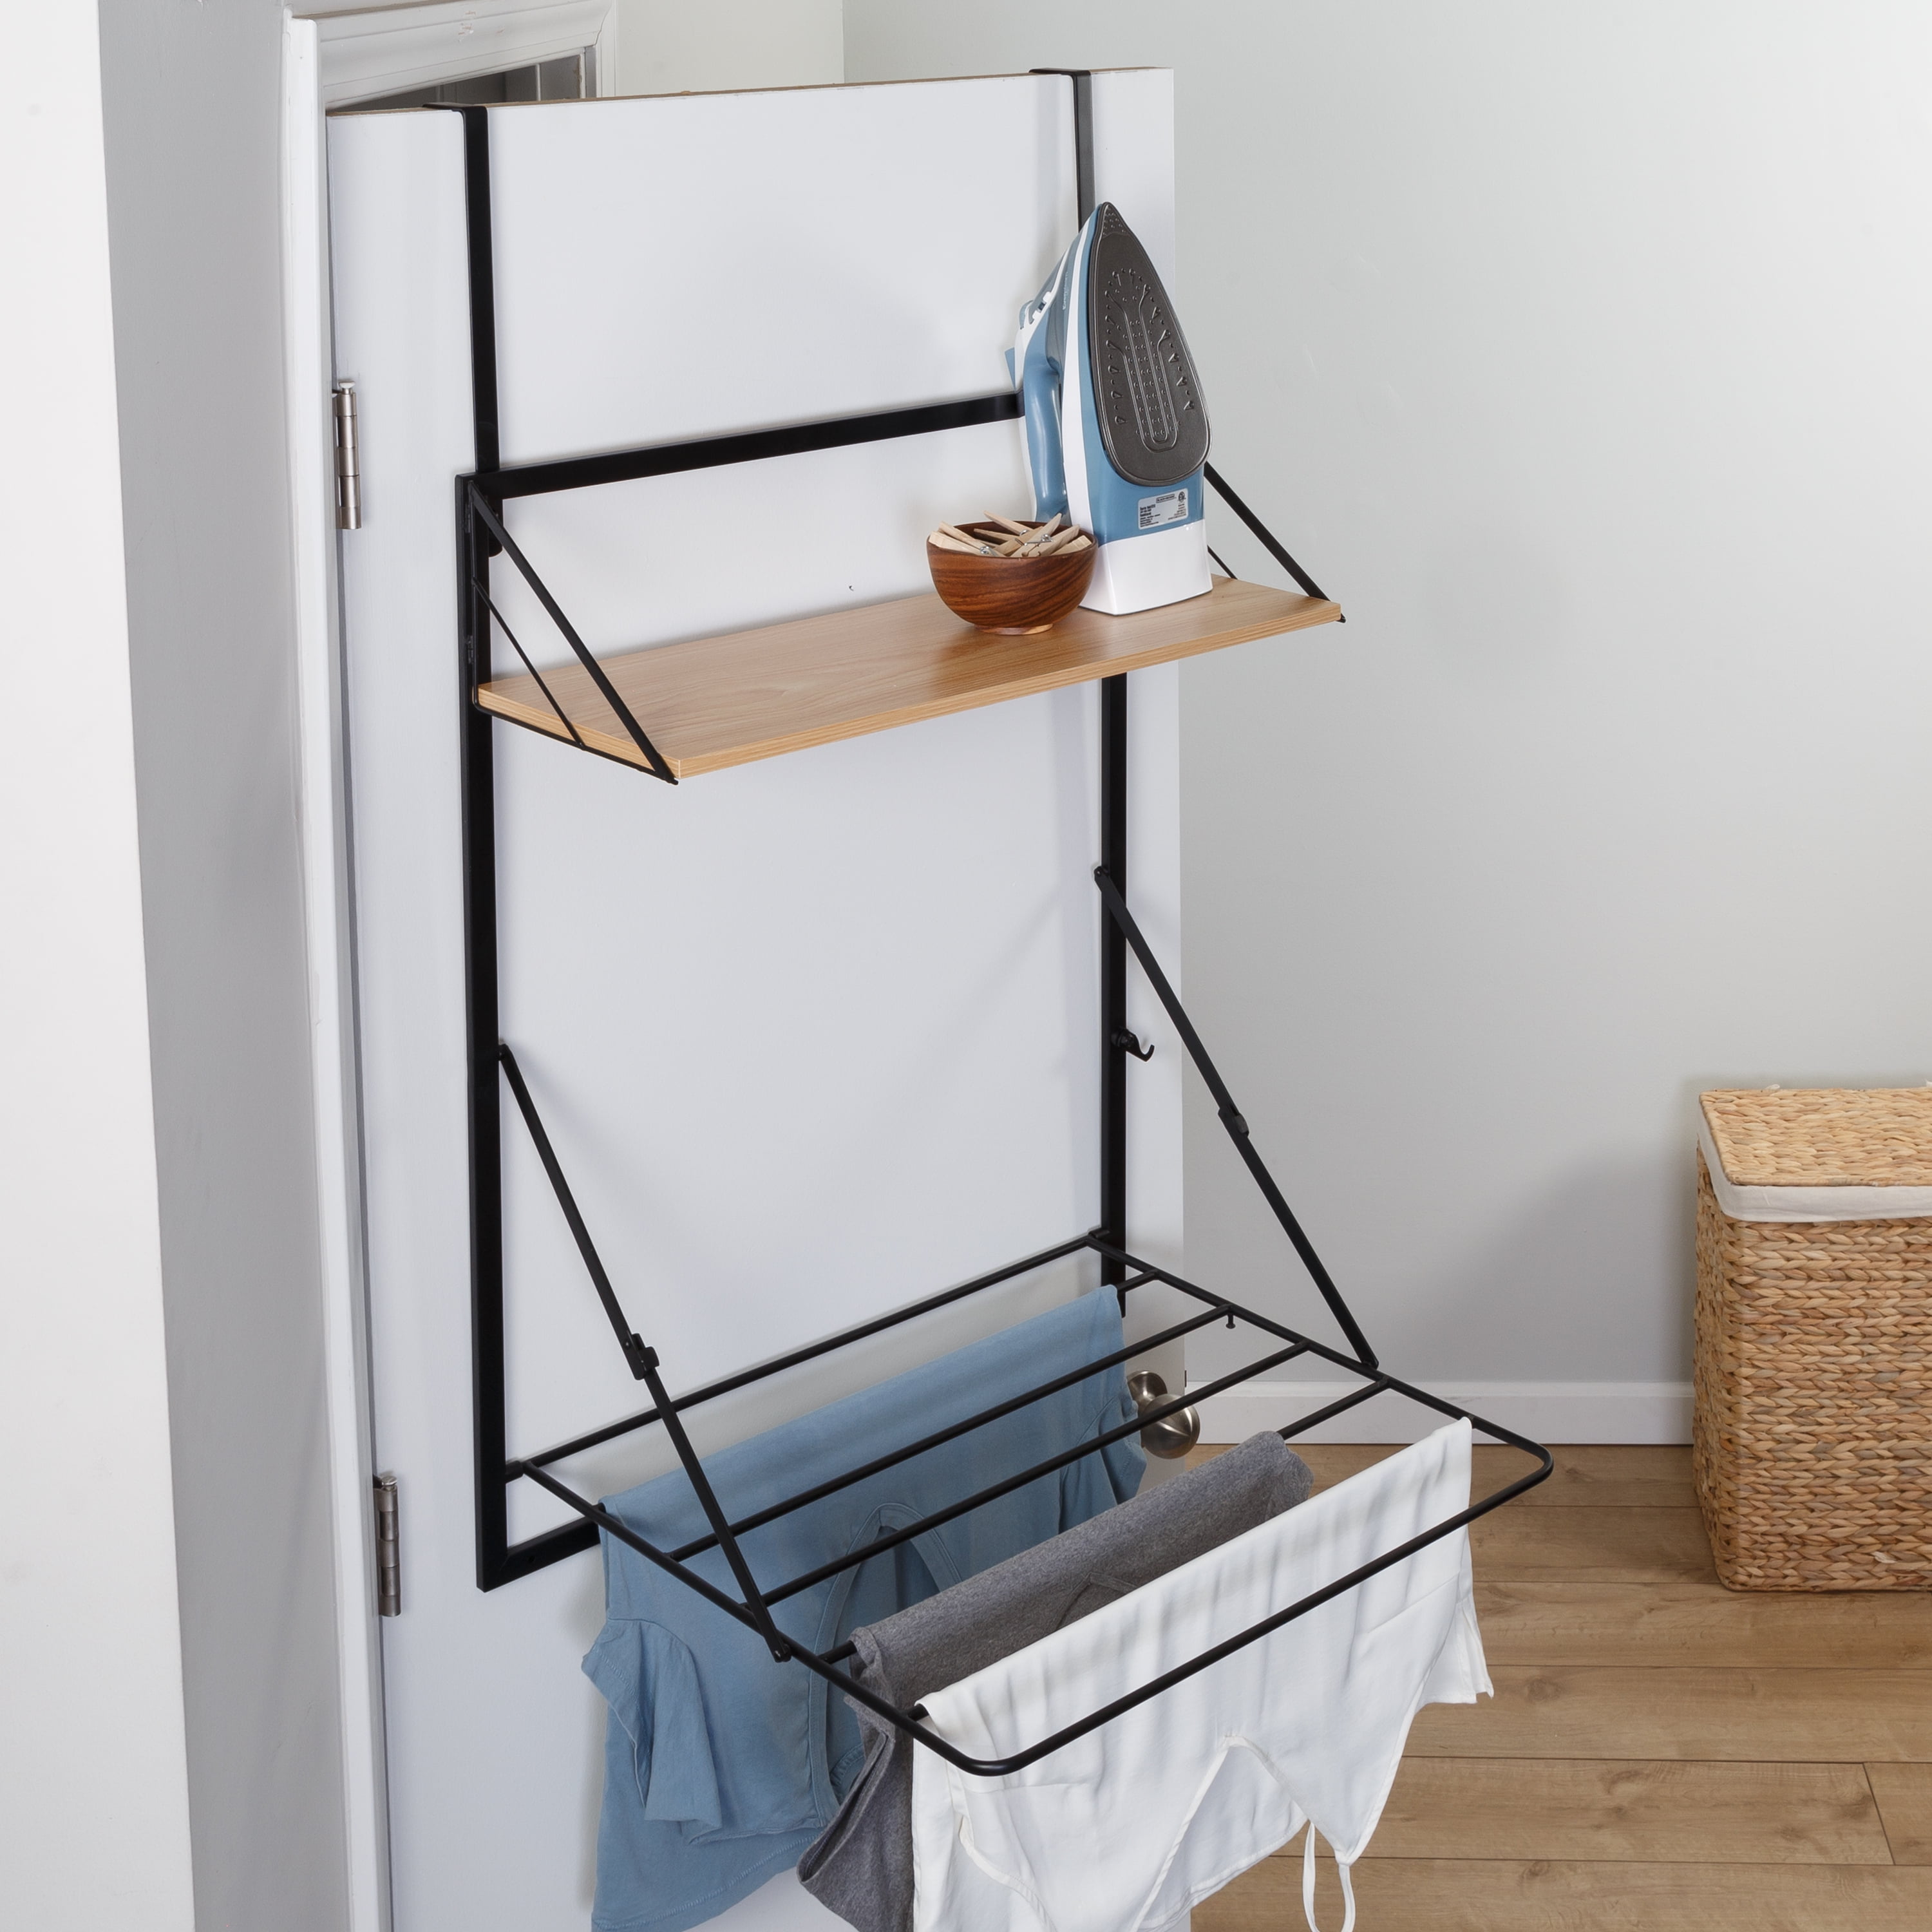 Honey-Can-Do - Black & Maple-Finish Wall-Mounted Drying Rack with Shelf